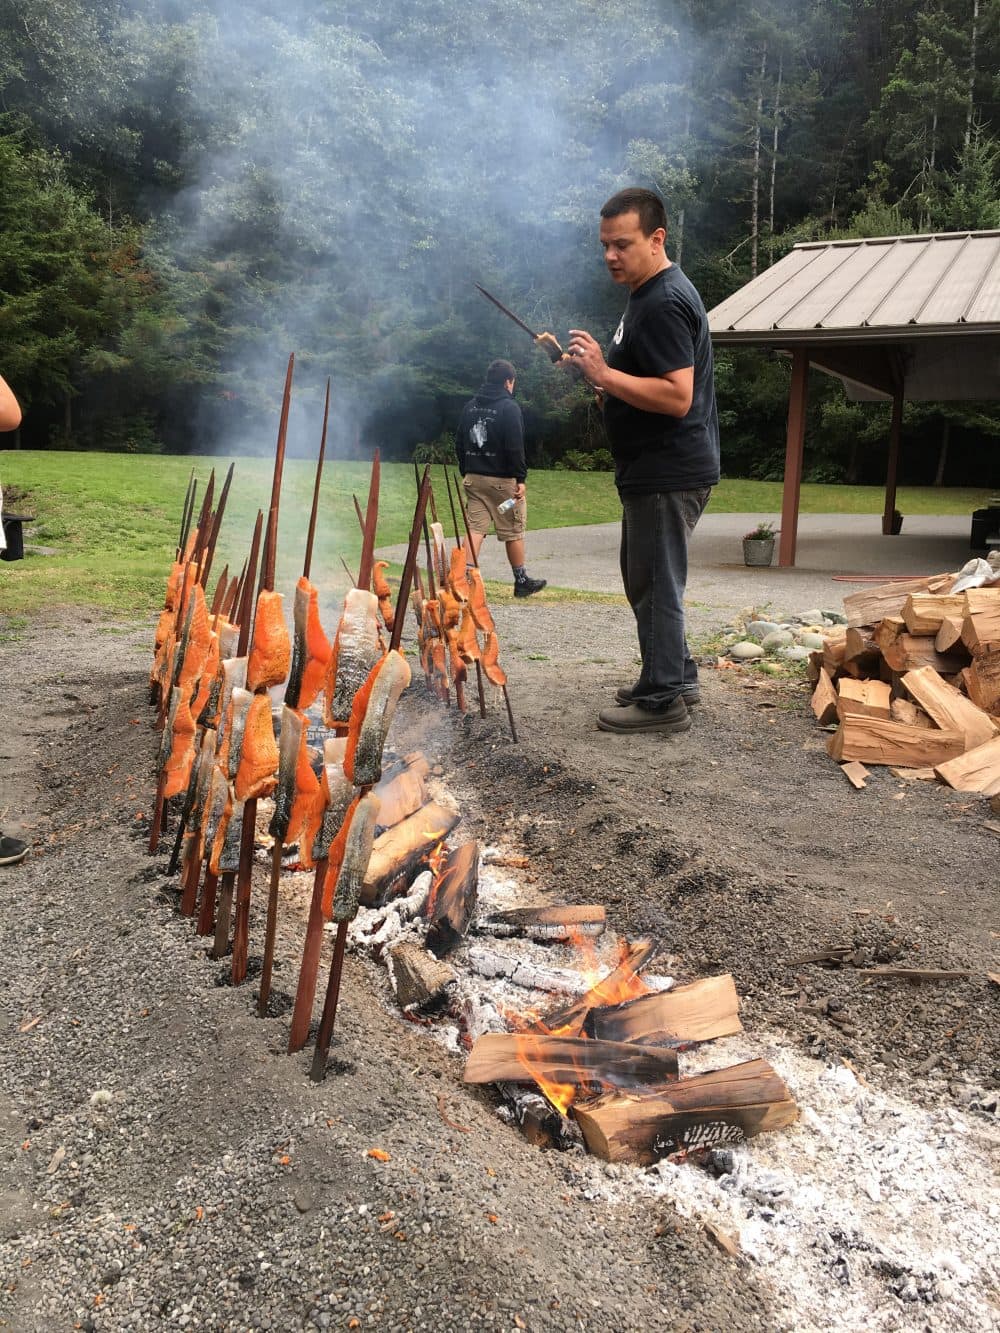 At the 55th Annual Yurok Salmon Festival, Oscar Gensaw cooks salmon the traditional way, on redwood skewers around a fire pit. This year, though, the tribe had to purchase salmon from Alaska. (Lisa Morehouse/KQED)